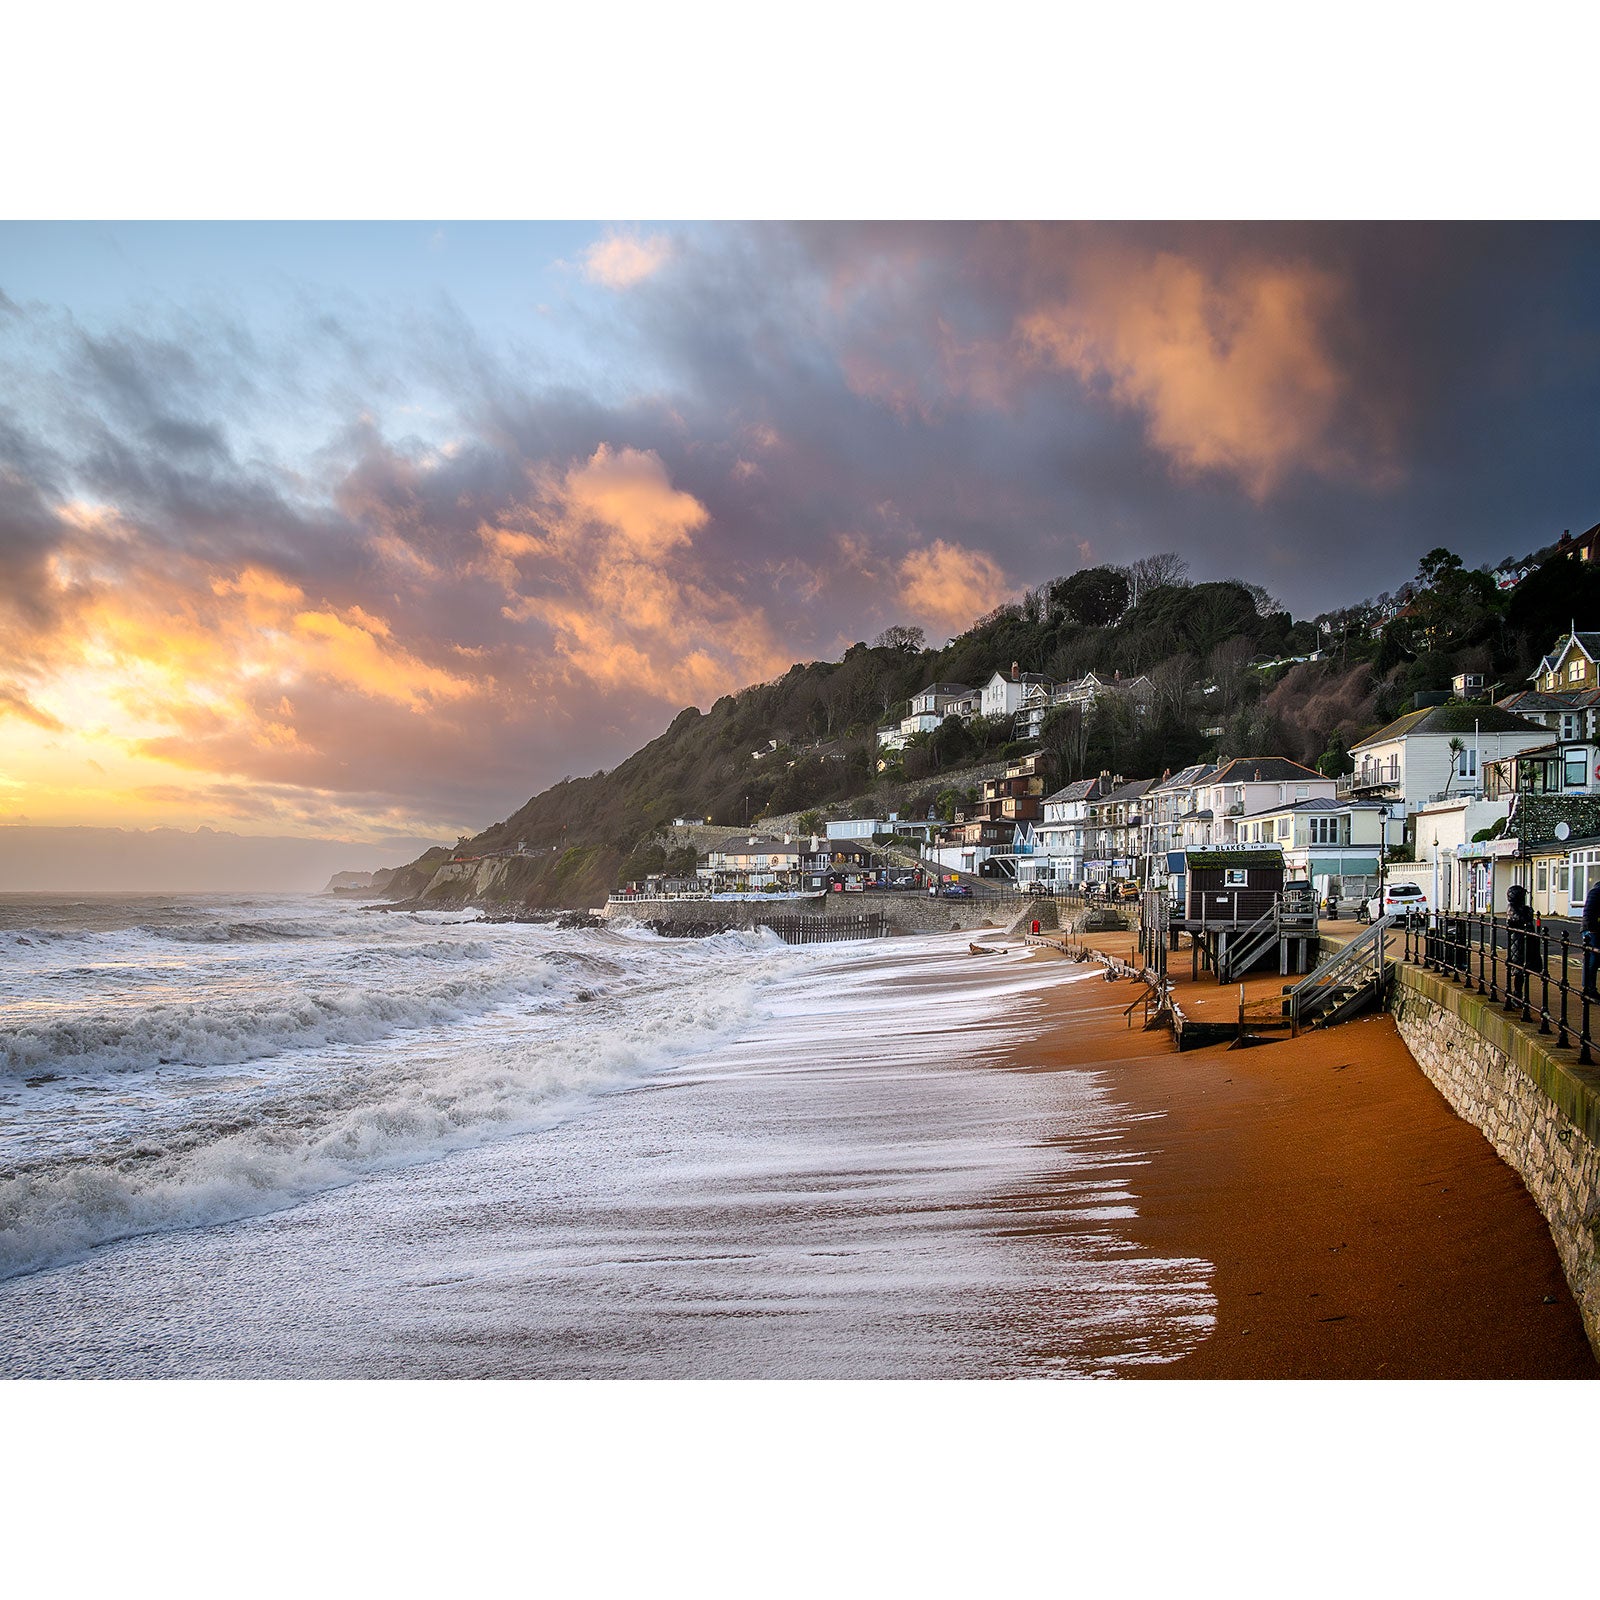 Sunset over the coastal town of Ventnor with waves crashing on the beach, captured by Available Light Photography.